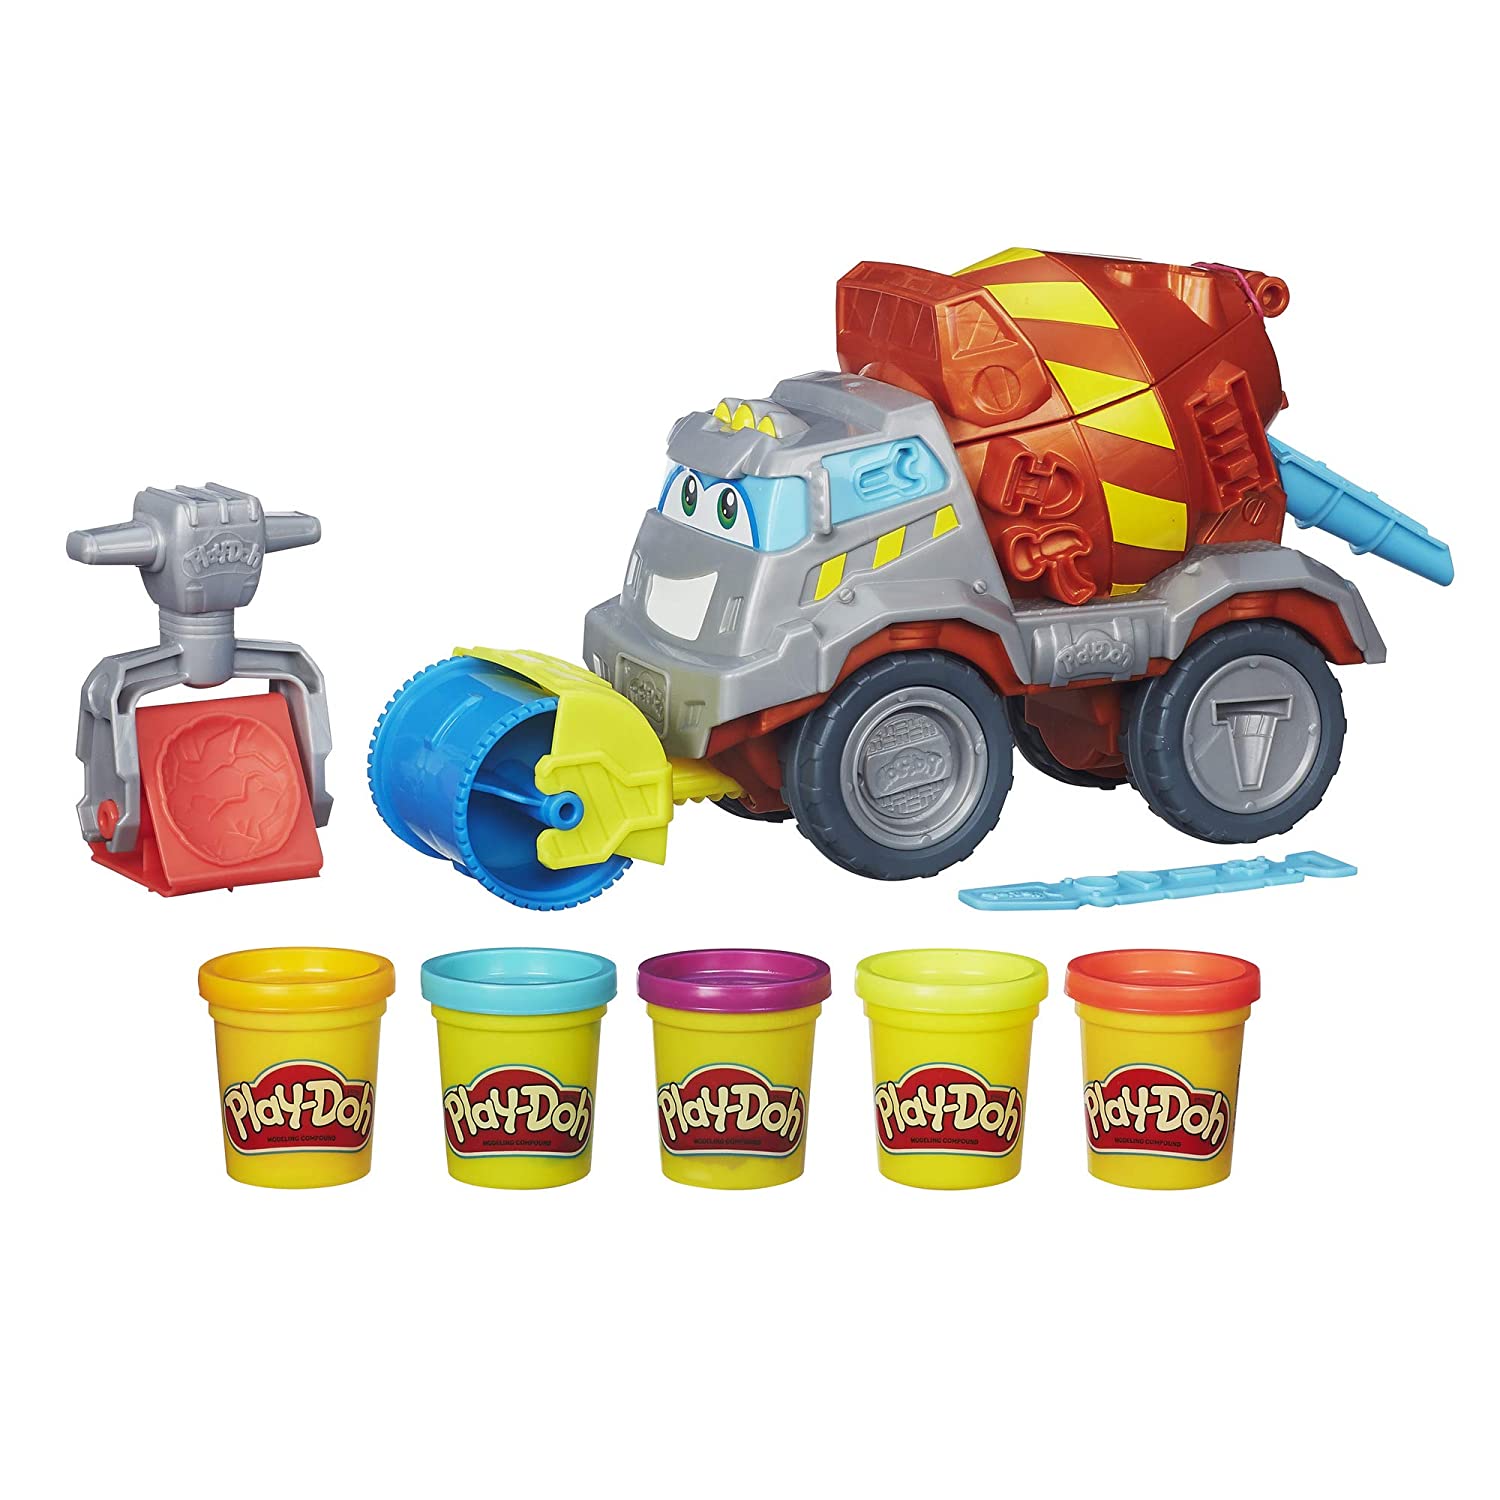 Top 8 Best Play Dough Sets for Boys Reviews in 2023 6